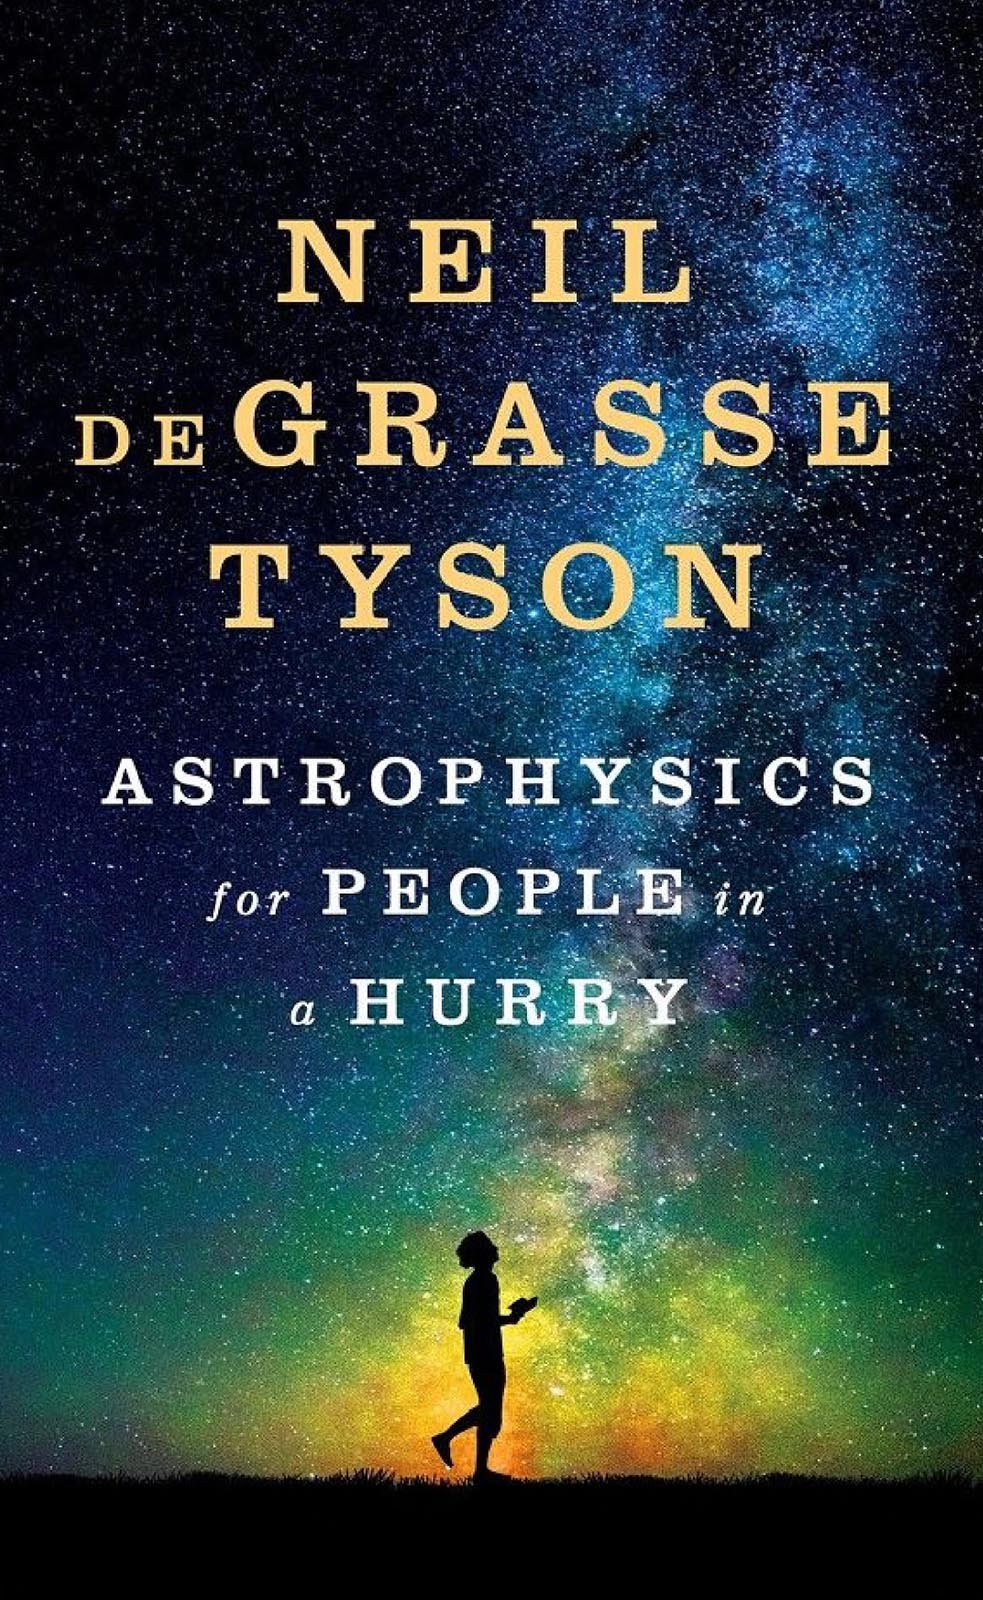 Astrophysics for People in a Hurry by Neil Degrasse Tyson | 32books